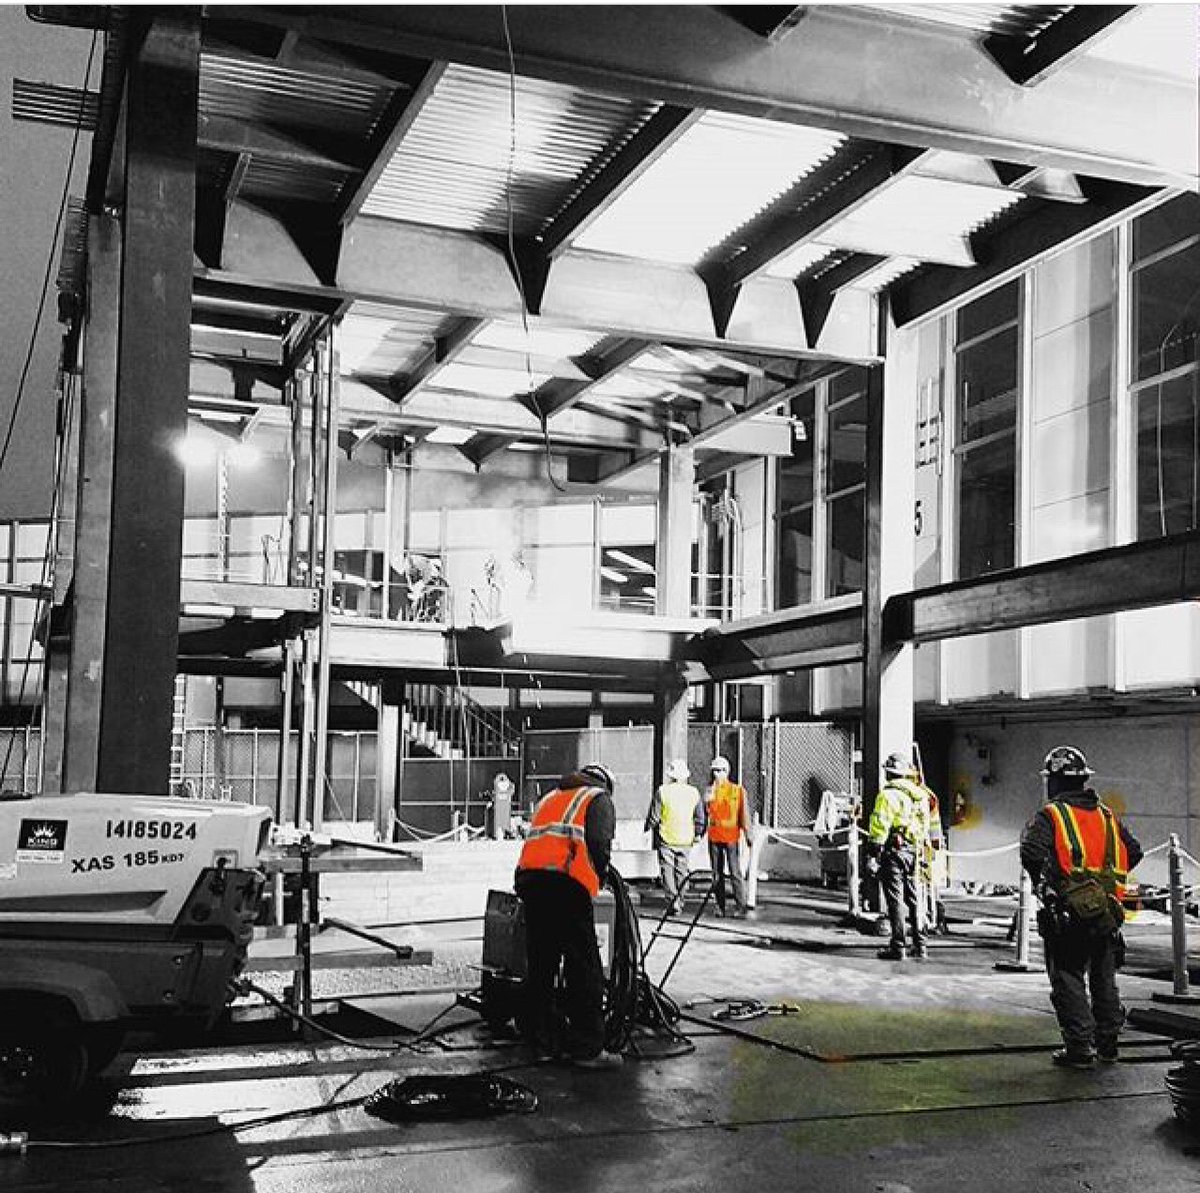 [PIC] Construction continues at T3 as part of LAX's makeover! Stay up-to-date: ow.ly/BjLJ309gnW6 #LAXisHappening c: eyeinspect